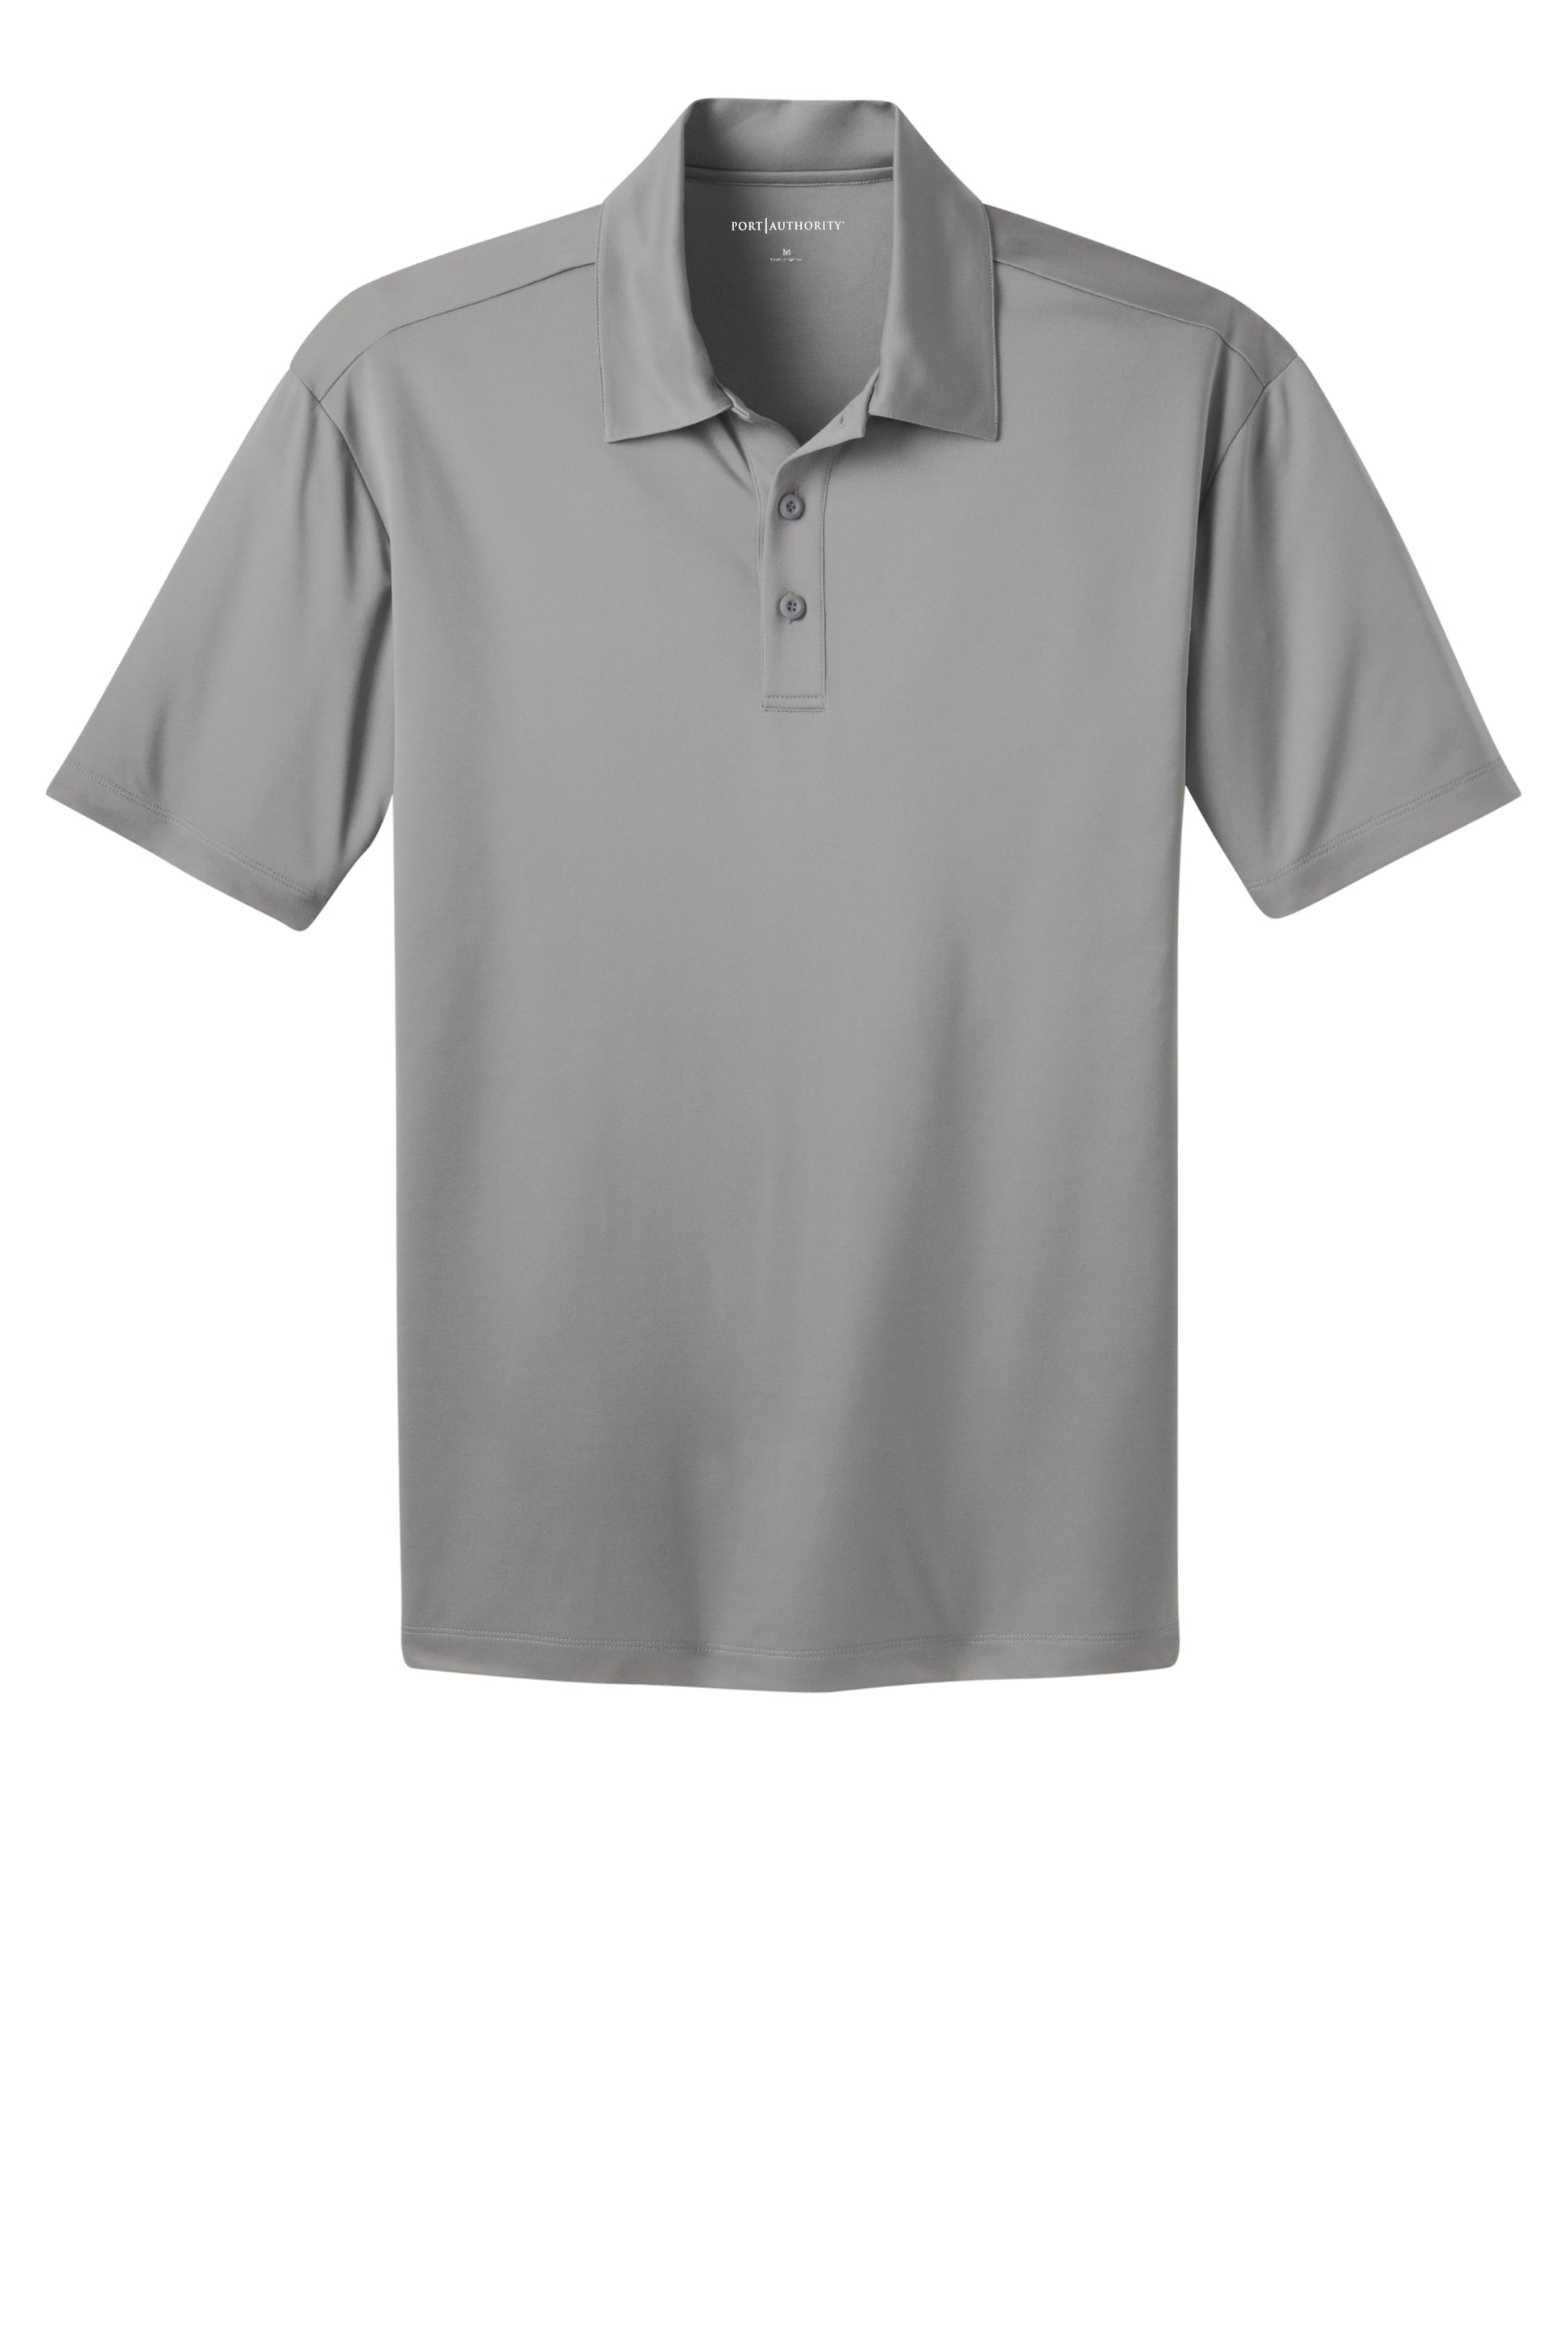 port authority silk touch polo gusty grey